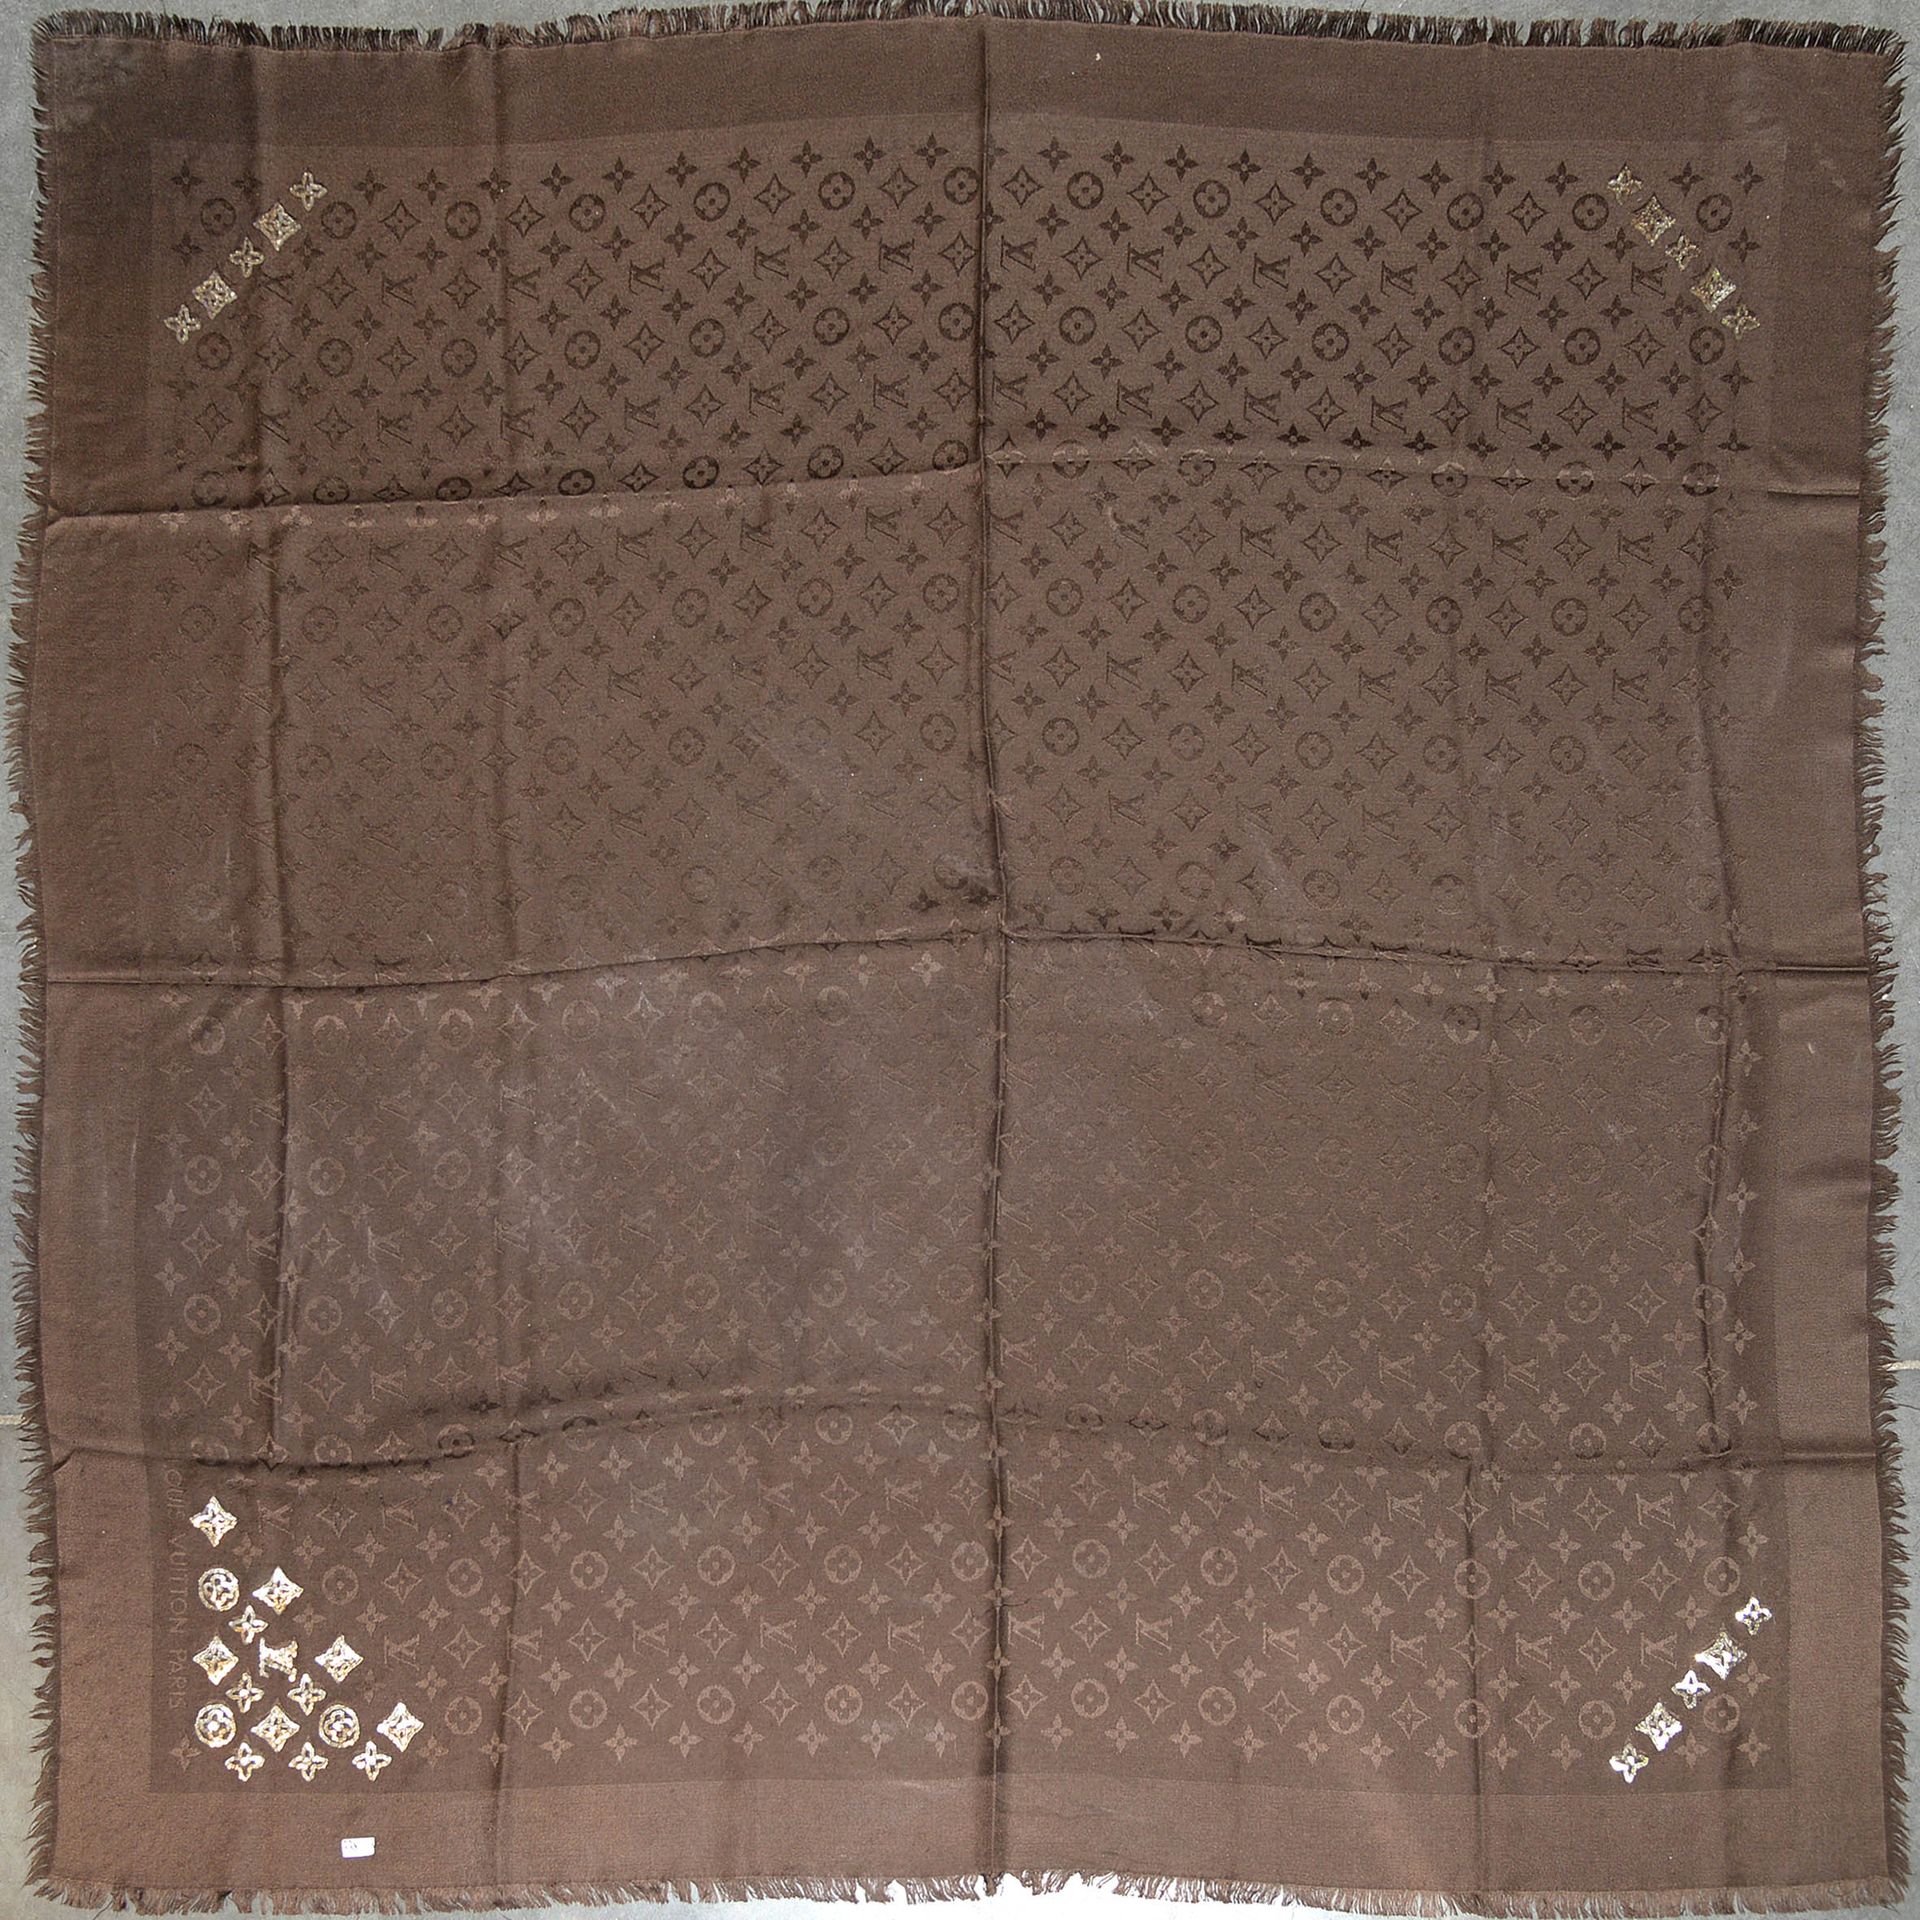 Large brown silk scarf brand Louis Vuitton decorated wit…